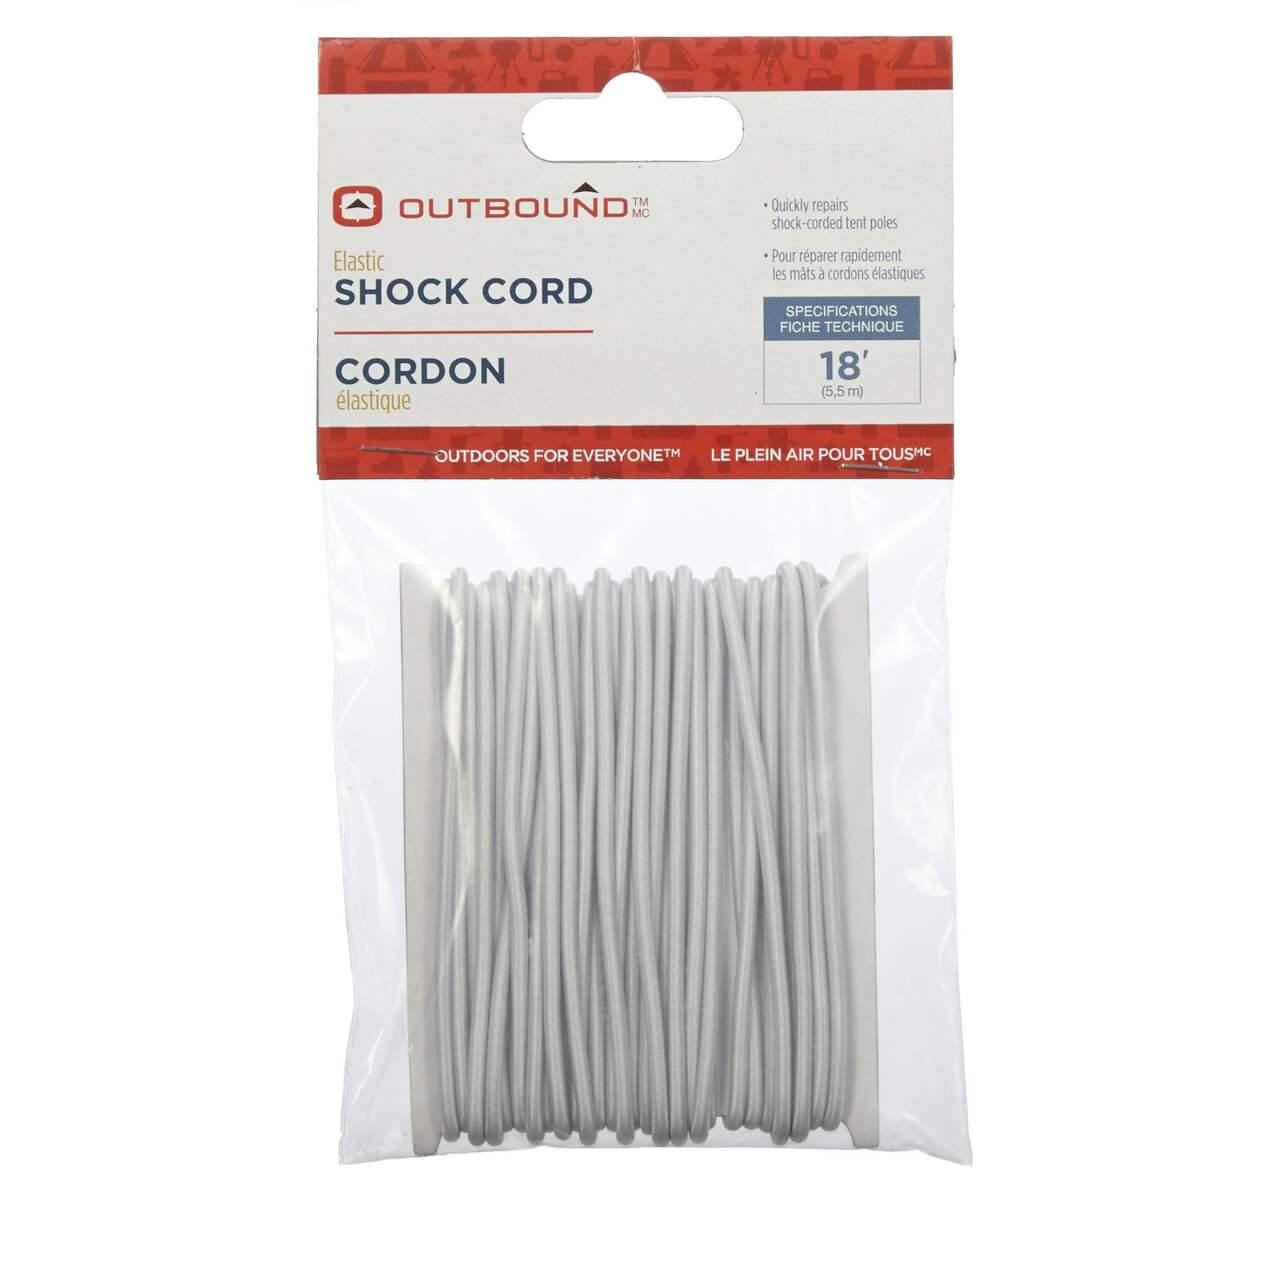 https://media-www.canadiantire.ca/product/playing/camping/camping-accessories/0765747/outbound-shock-cord-16840a96-c169-4238-8d2f-869e48bdb69c-jpgrendition.jpg?imdensity=1&imwidth=1244&impolicy=mZoom